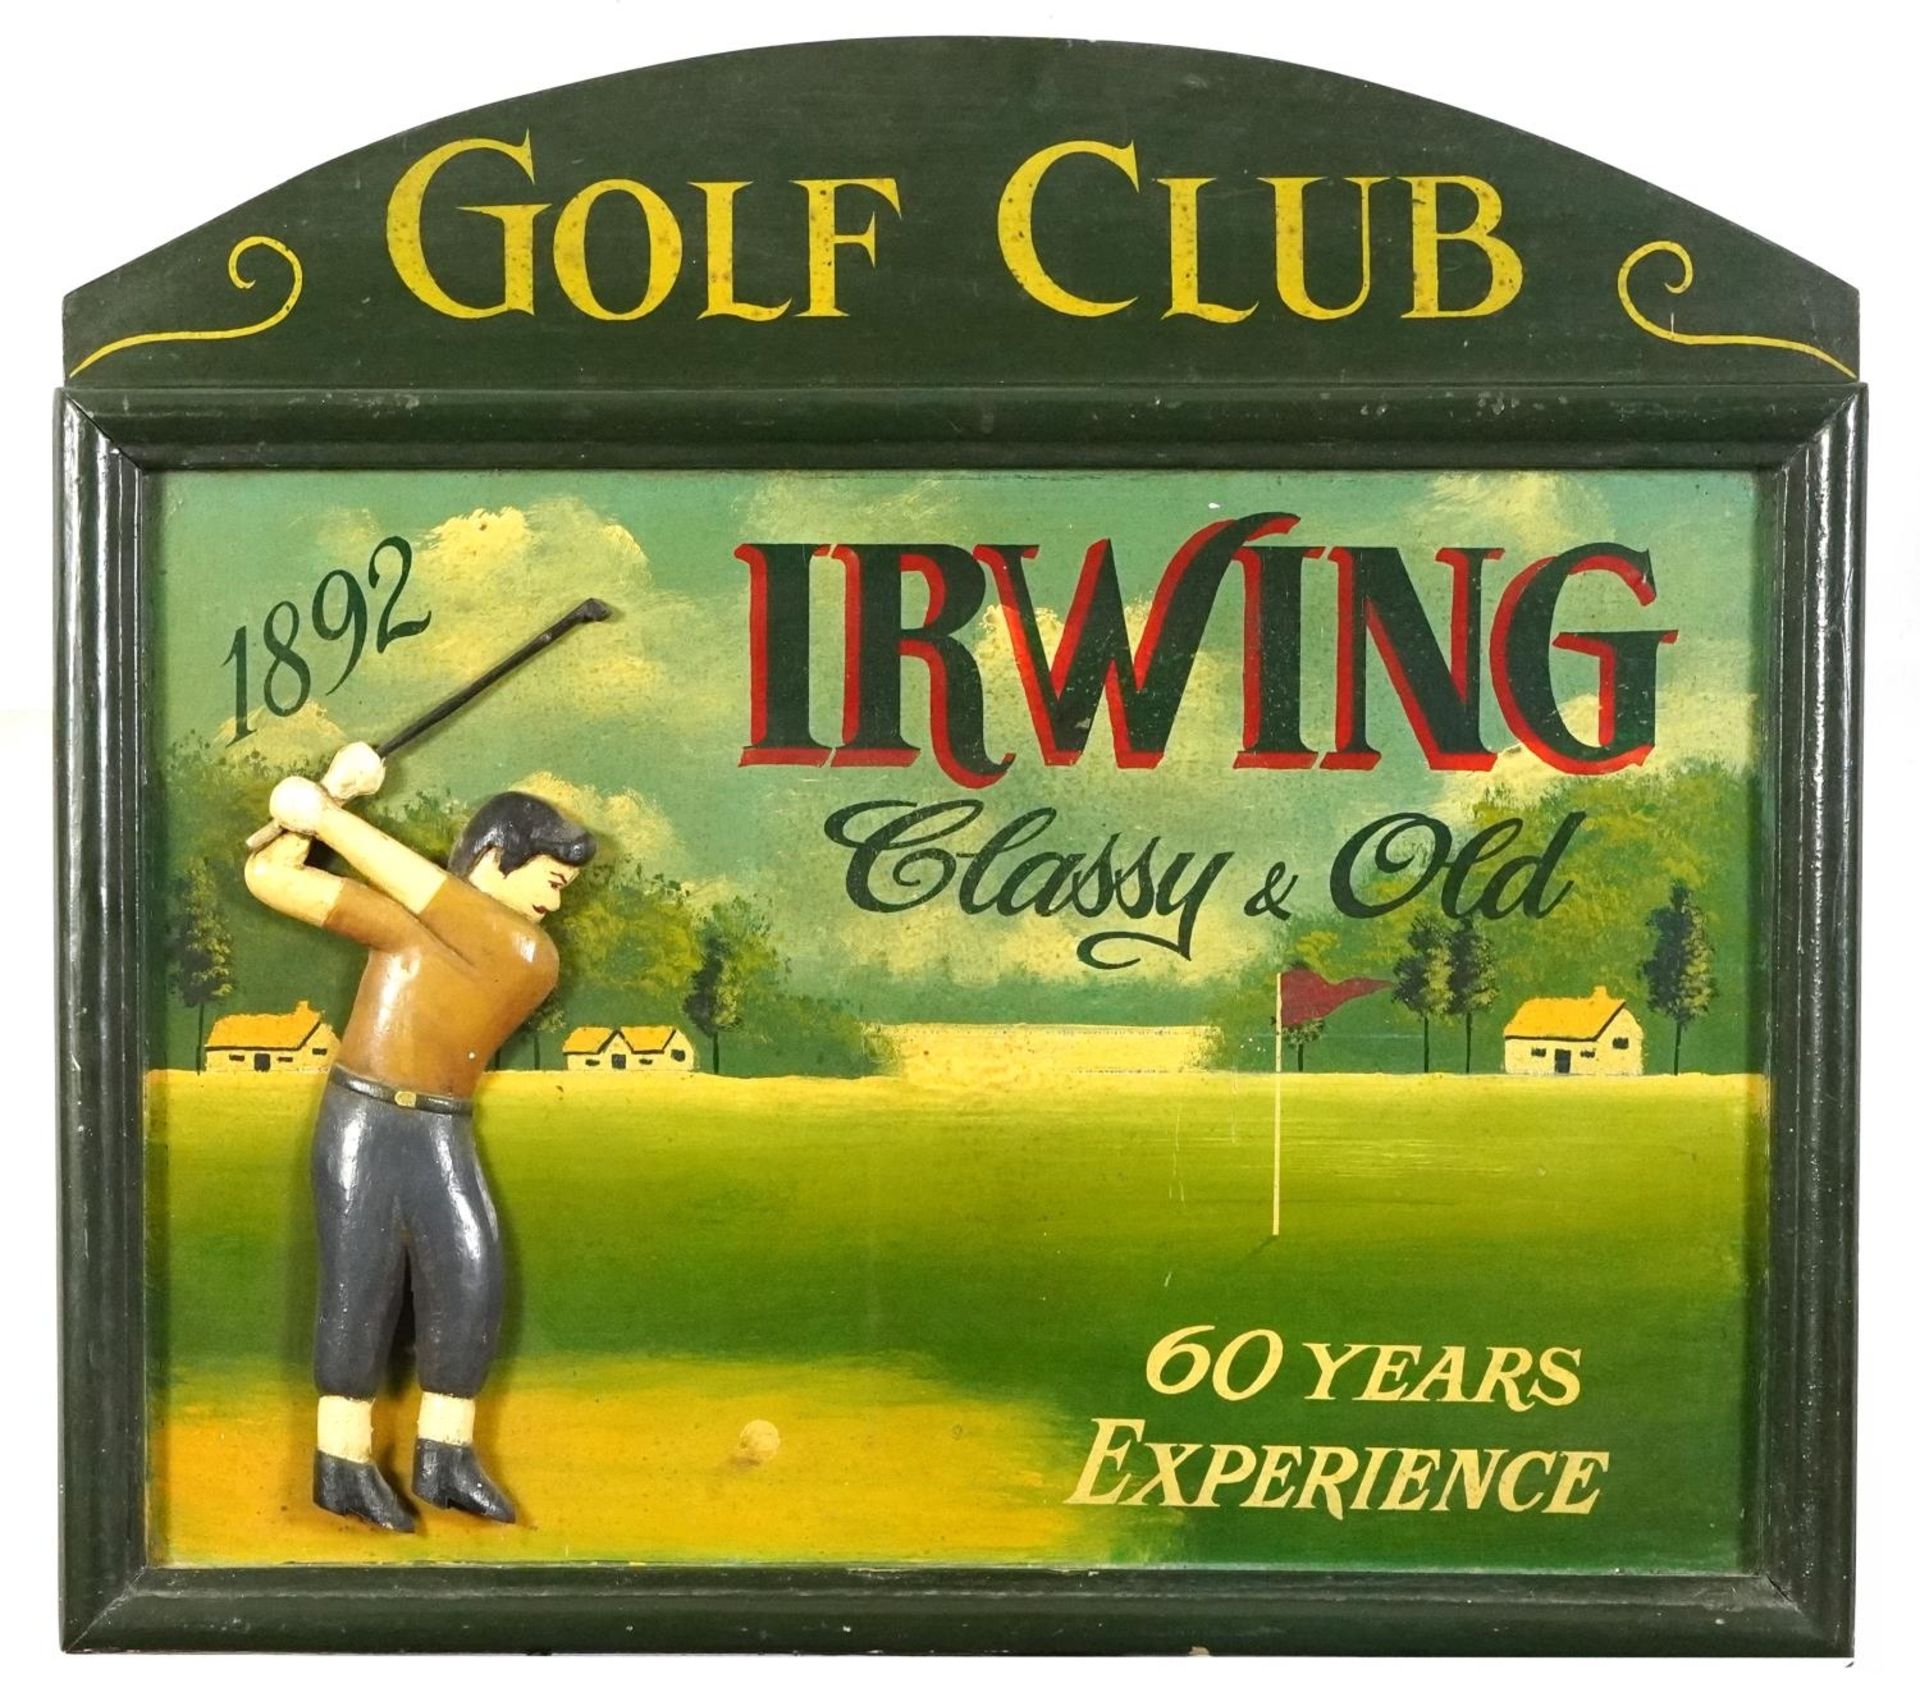 Irwin Classy & Old Golf Club hand painted wooden advertising panel, 57cm x 51cm : For further